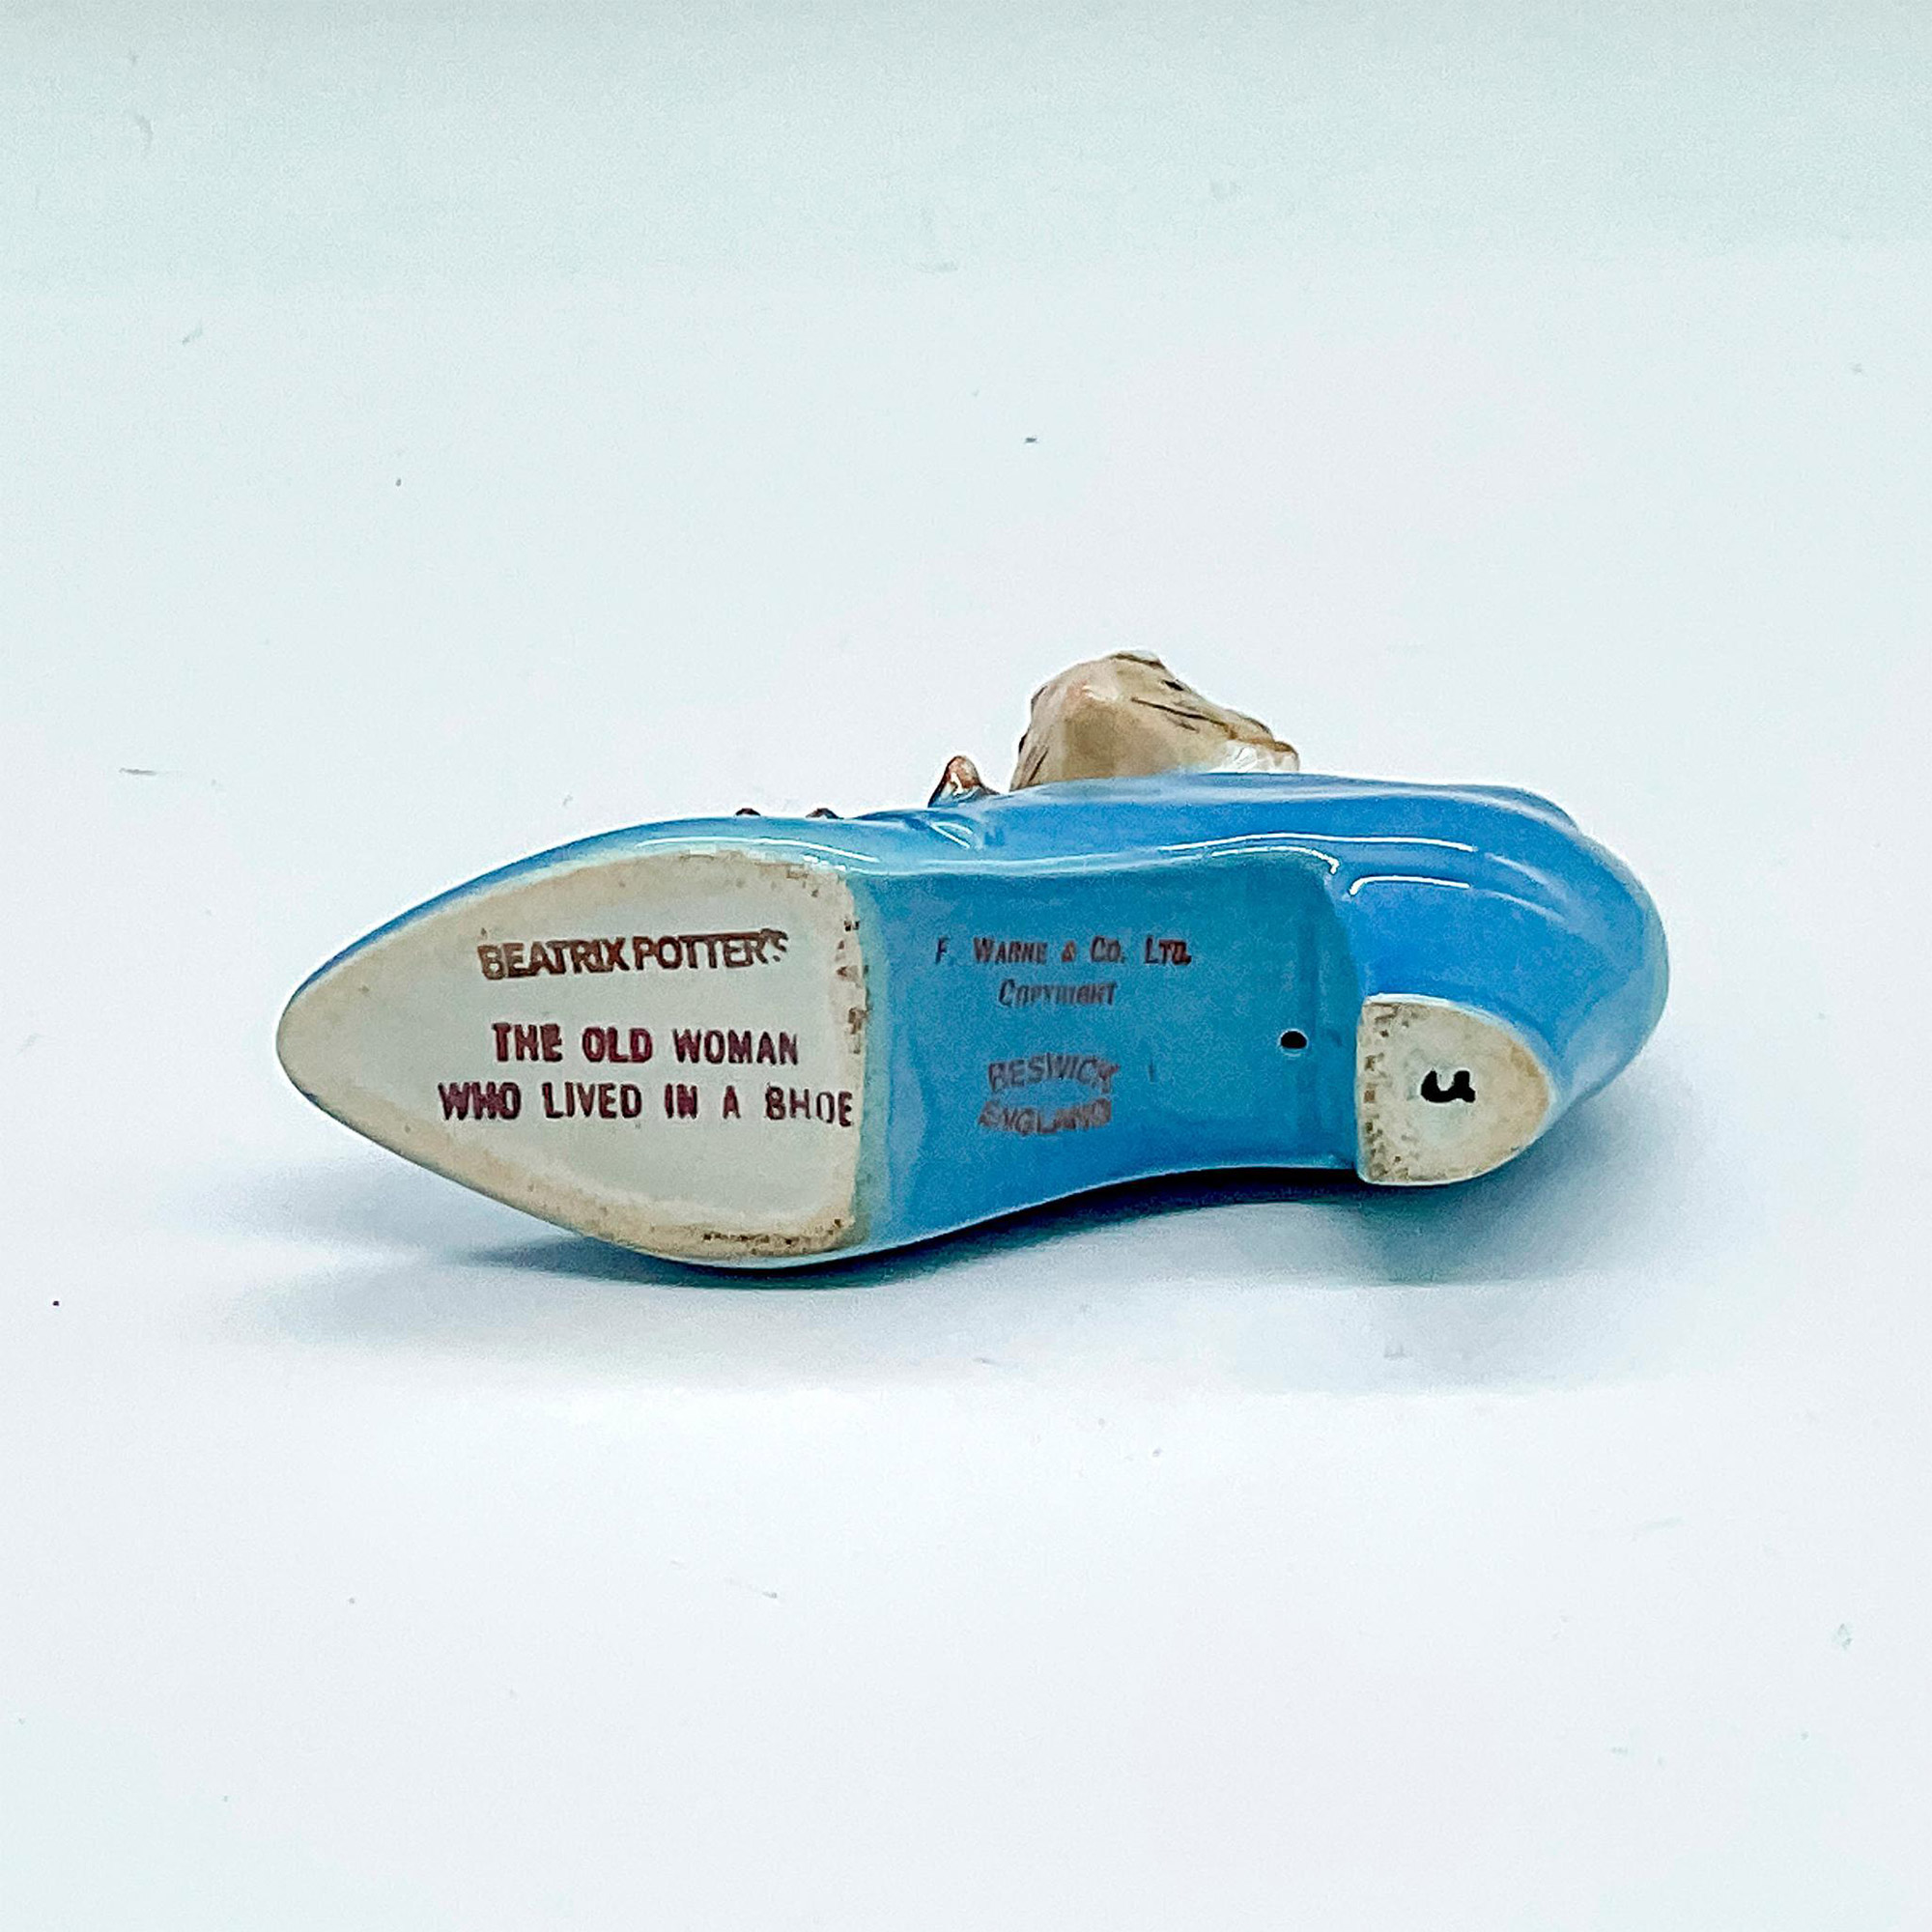 Beswick Beatrix Potter's Figurine, Mouse in Shoe - Image 3 of 3